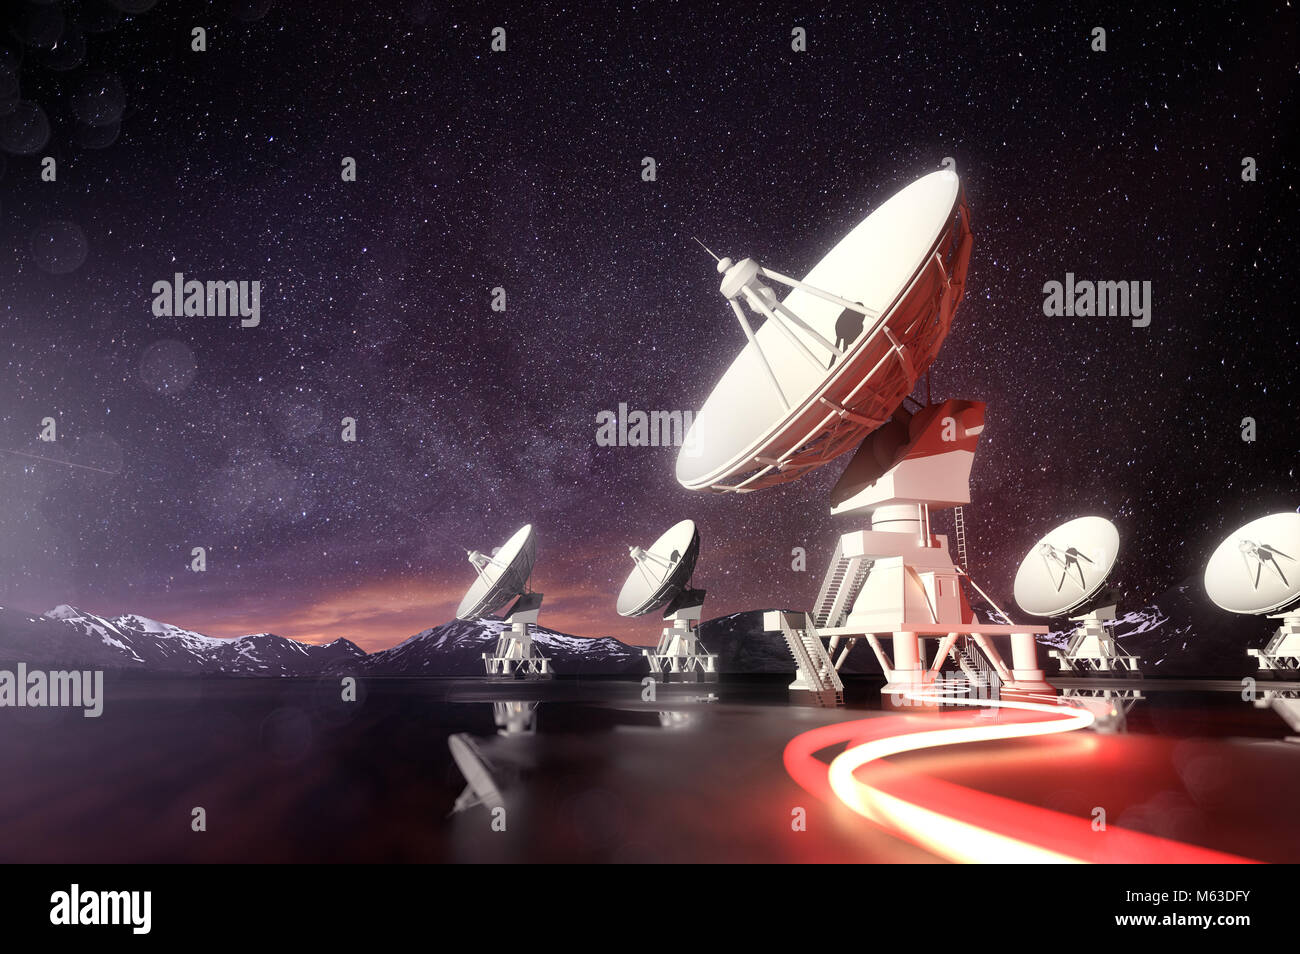 Radio telescopes searching for astronomical objects at night. 3D illustration. Stock Photo